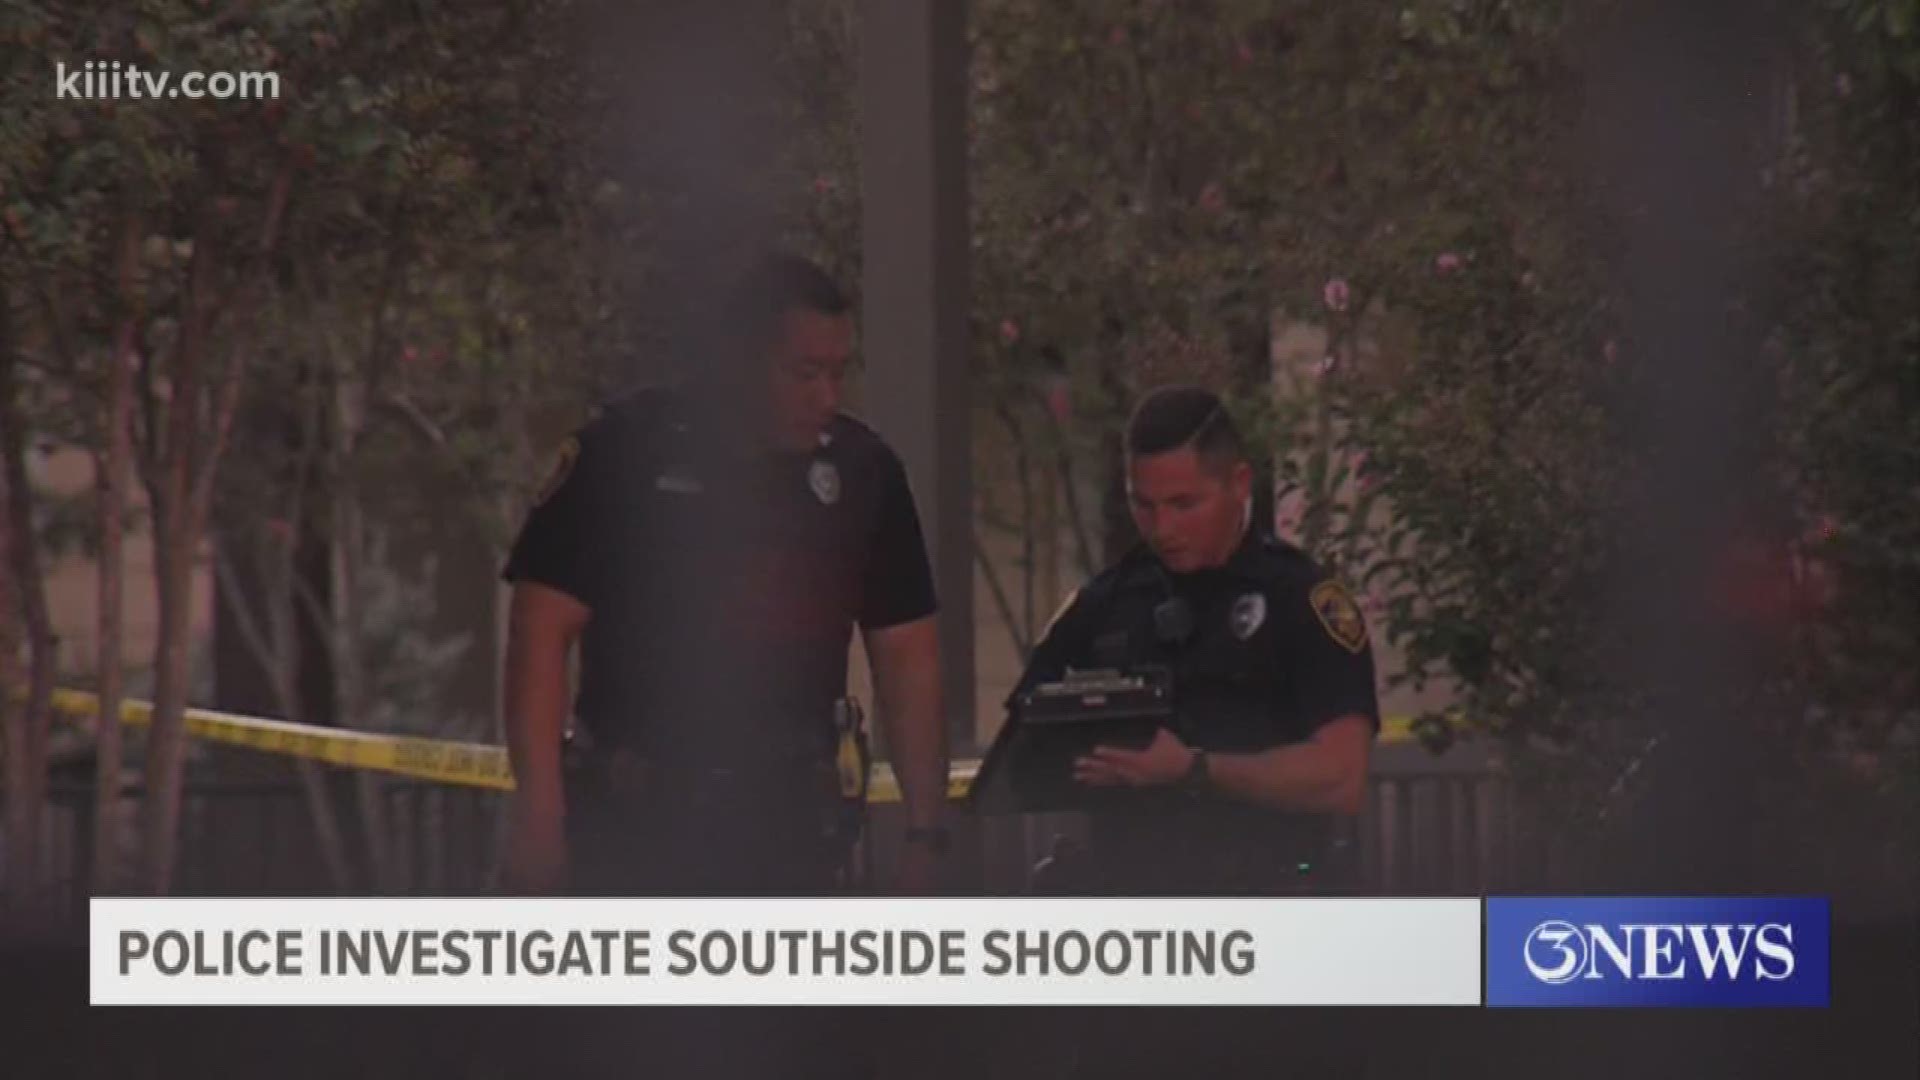 Police are on the lookout Wednesday night for a suspect accused of a shooting at a southside apartment complex near the intersection of Airline and Saratoga.